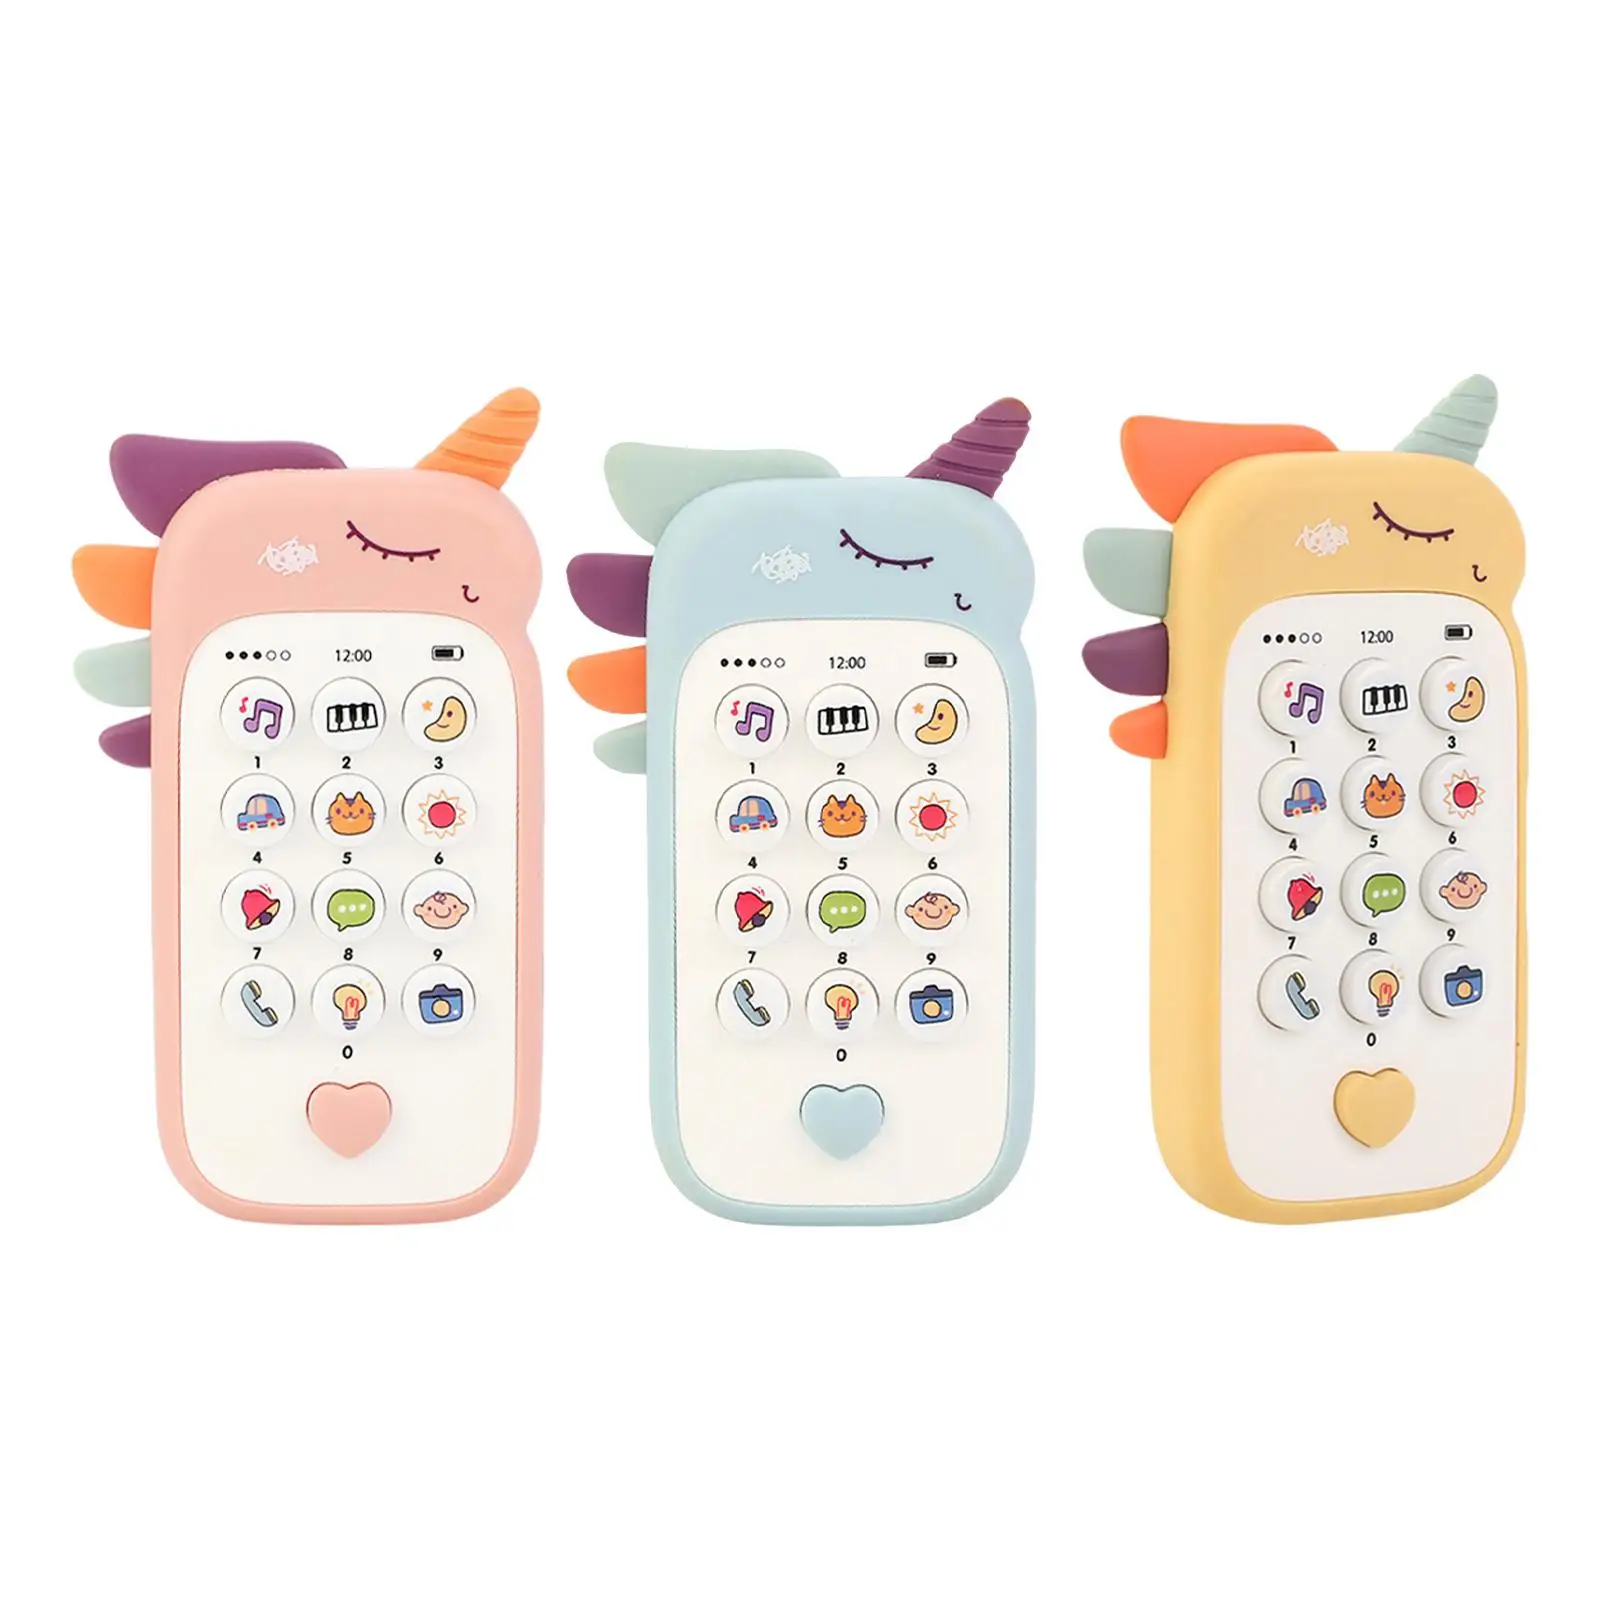 Musical Baby Cell Phone Toy Baby Light up Toy Play Phones with Lights for Boys Girls Baby Infants 2 3 Years Old Aged 18Months+